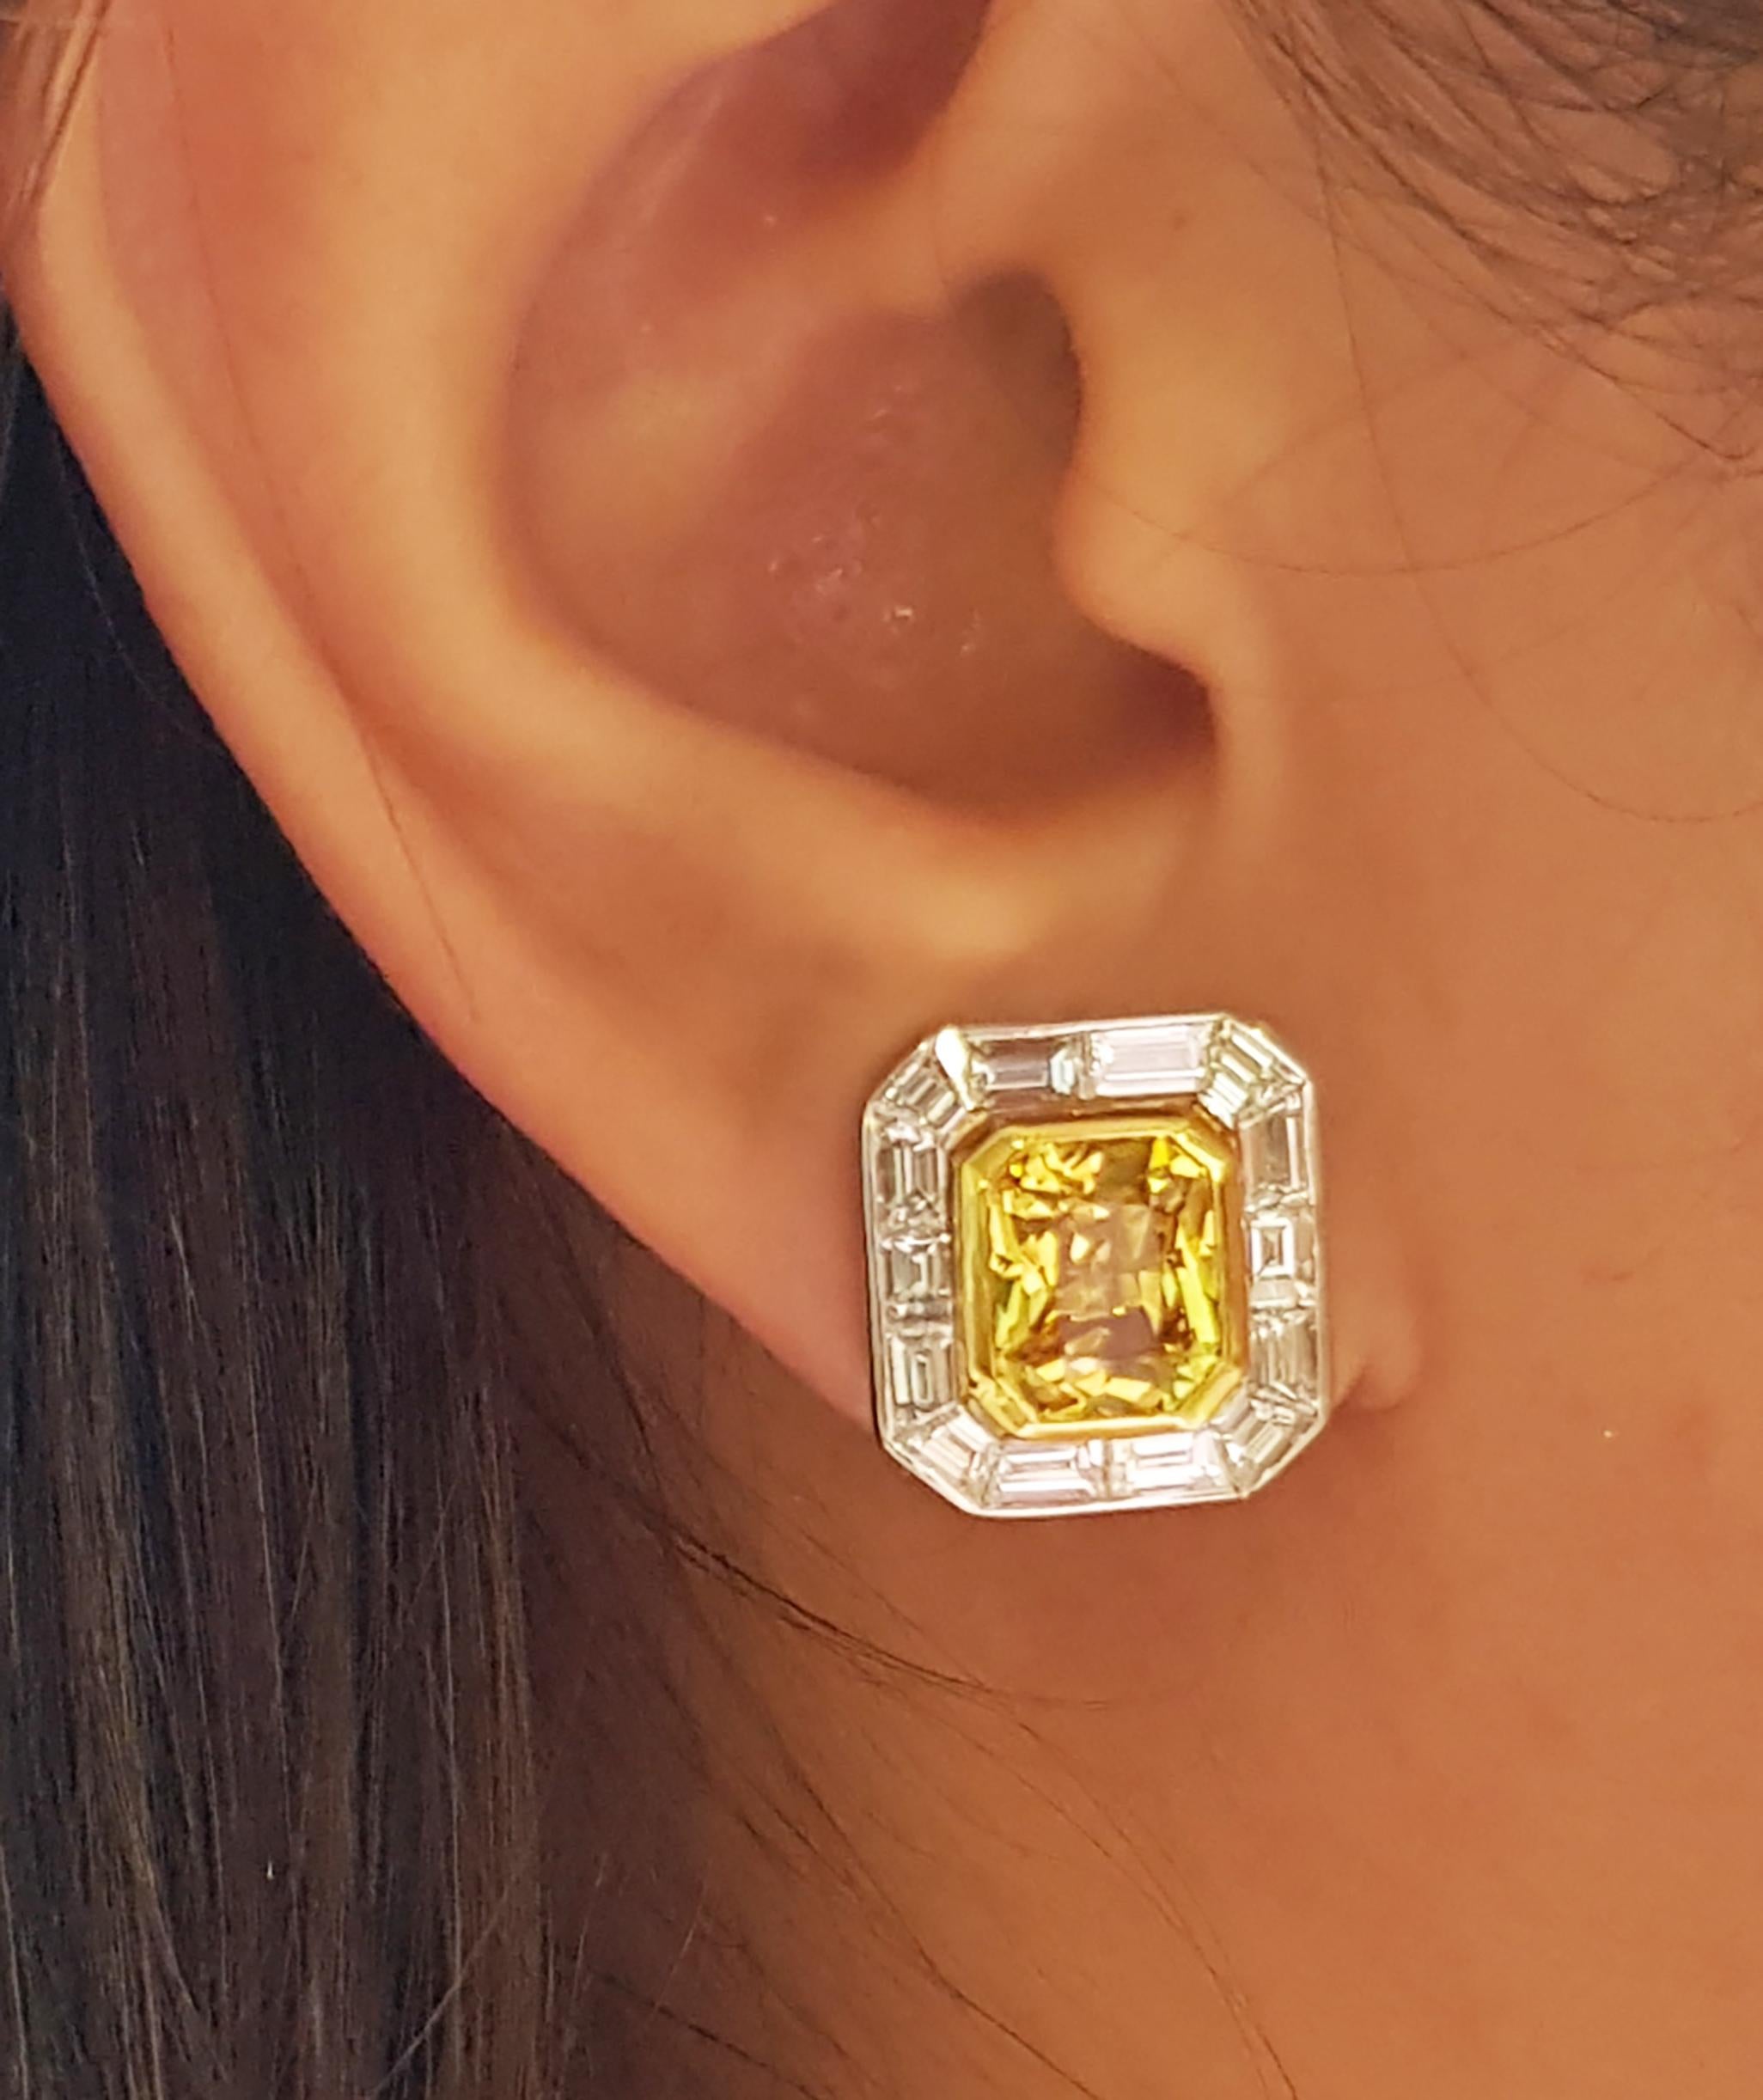 Yellow Sapphire 5.26 carats with Diamond 1.15 carats Earrings set in 18 Karat White Gold Settings

Width:  1.4 cm 
Length: 1.4 cm
Total Weight: 8.89 grams

